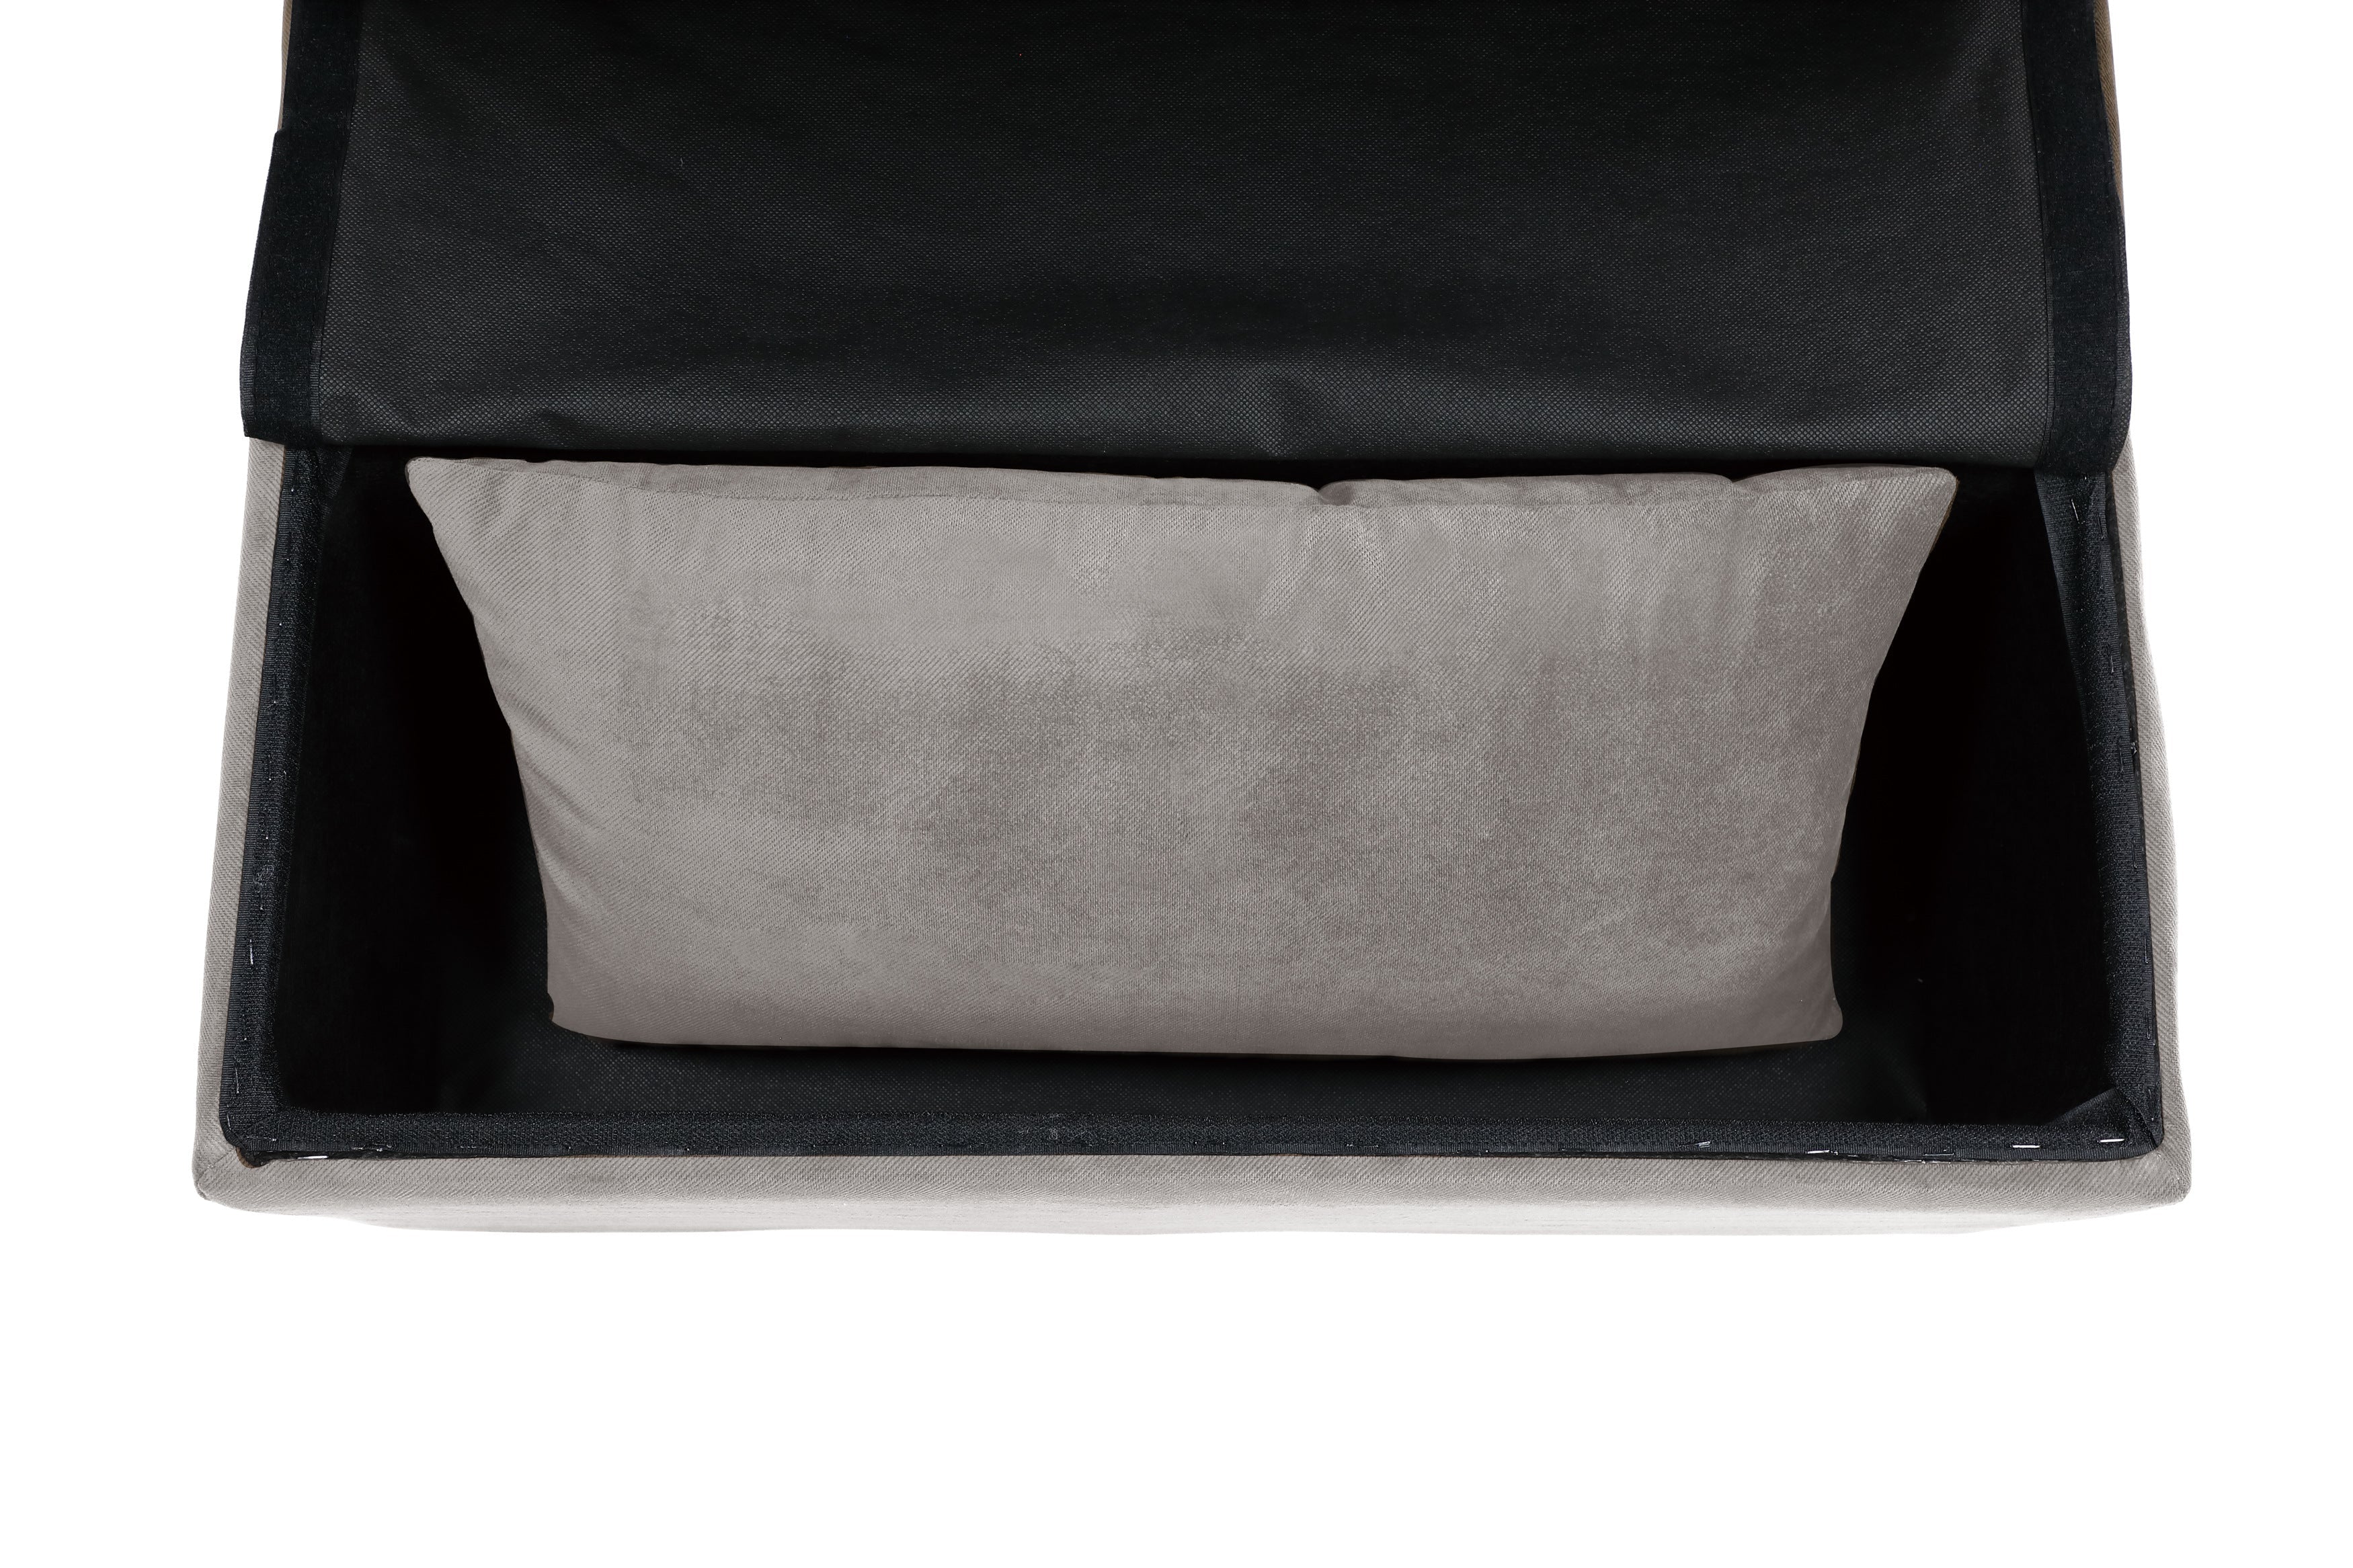 Garrell Brownish Gray Velvet Lift Top Storage Bench with Pull-out Bed - 4615-F4 - Bien Home Furniture &amp; Electronics